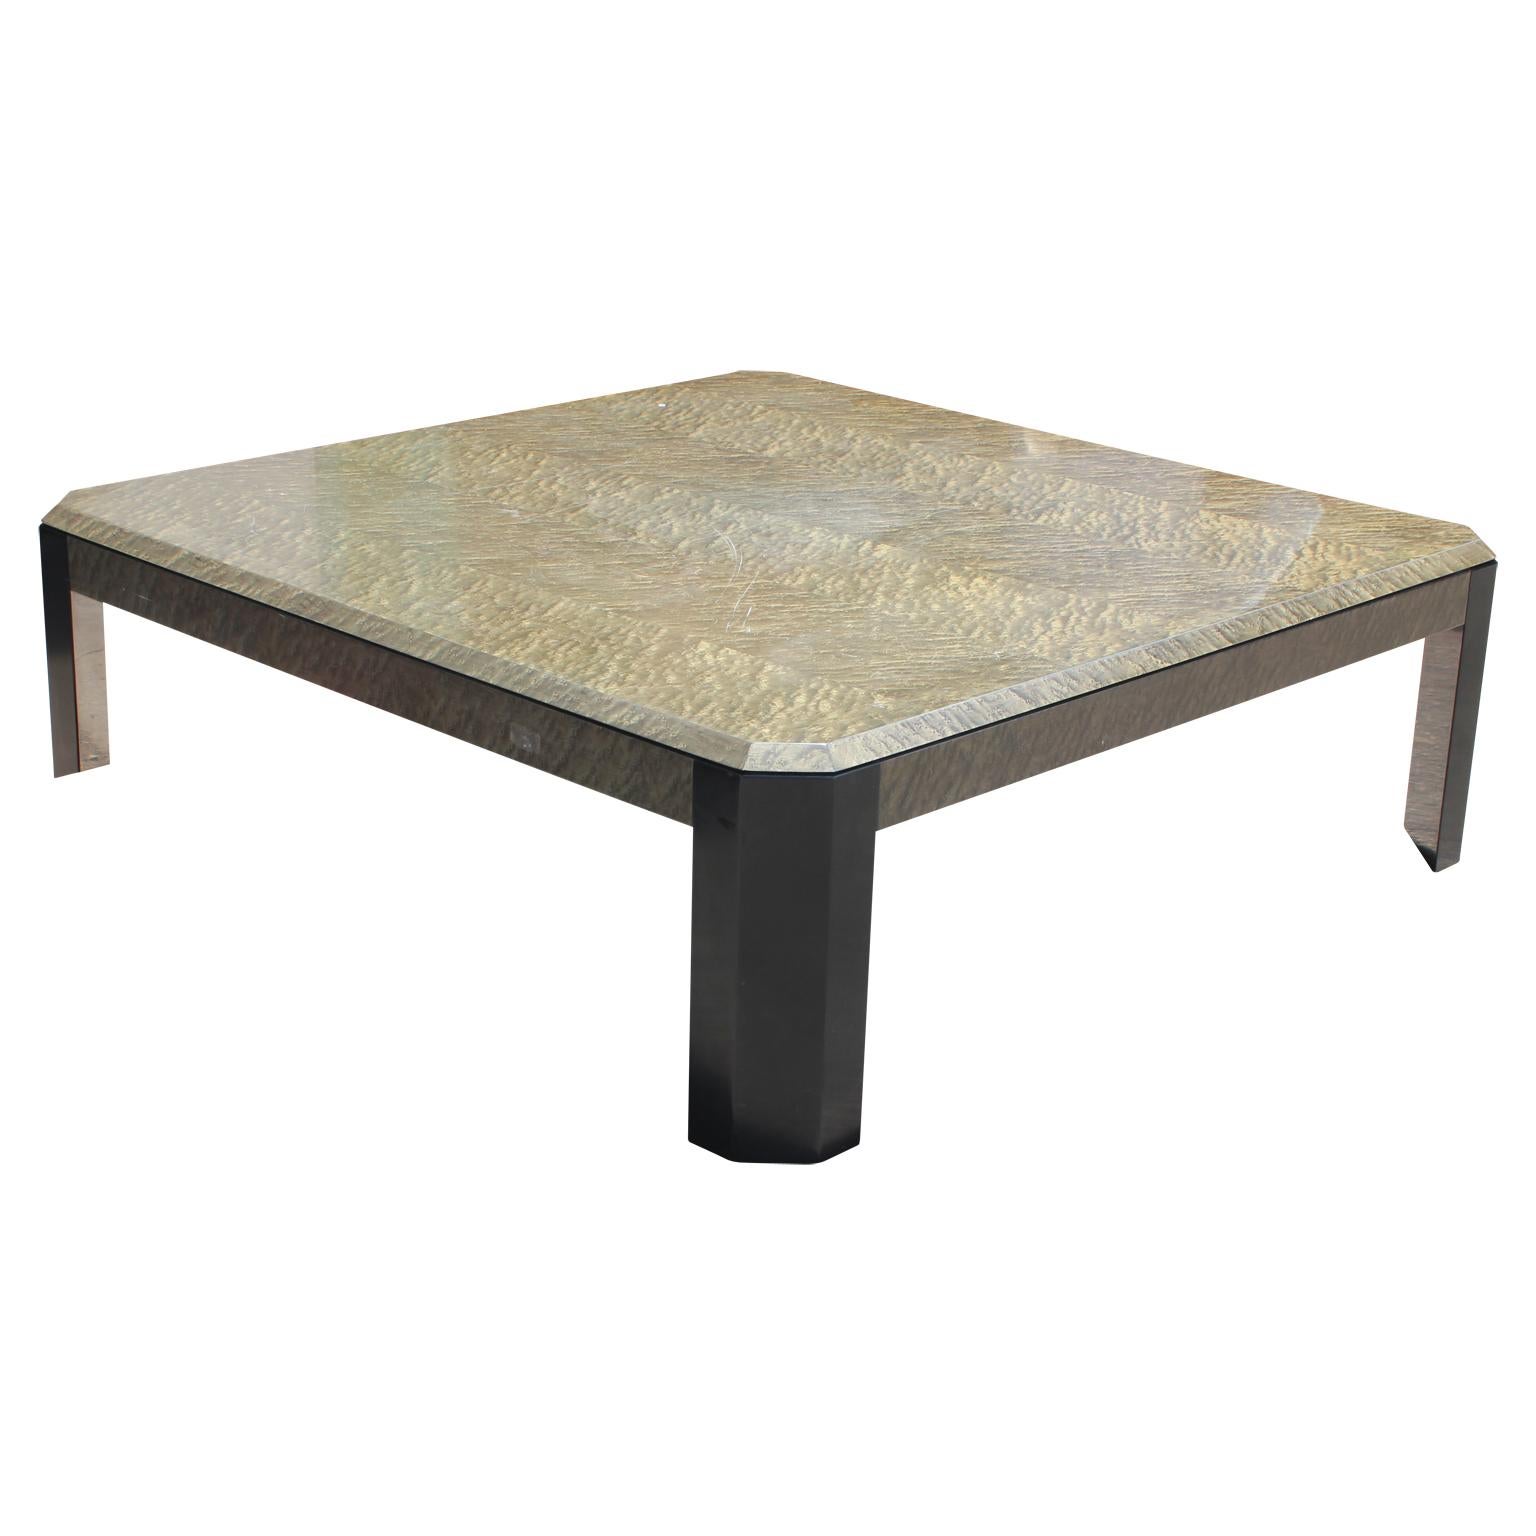 Unique modern square burl wood silver grey two tone coffee table. In the style of Jay Spectre.